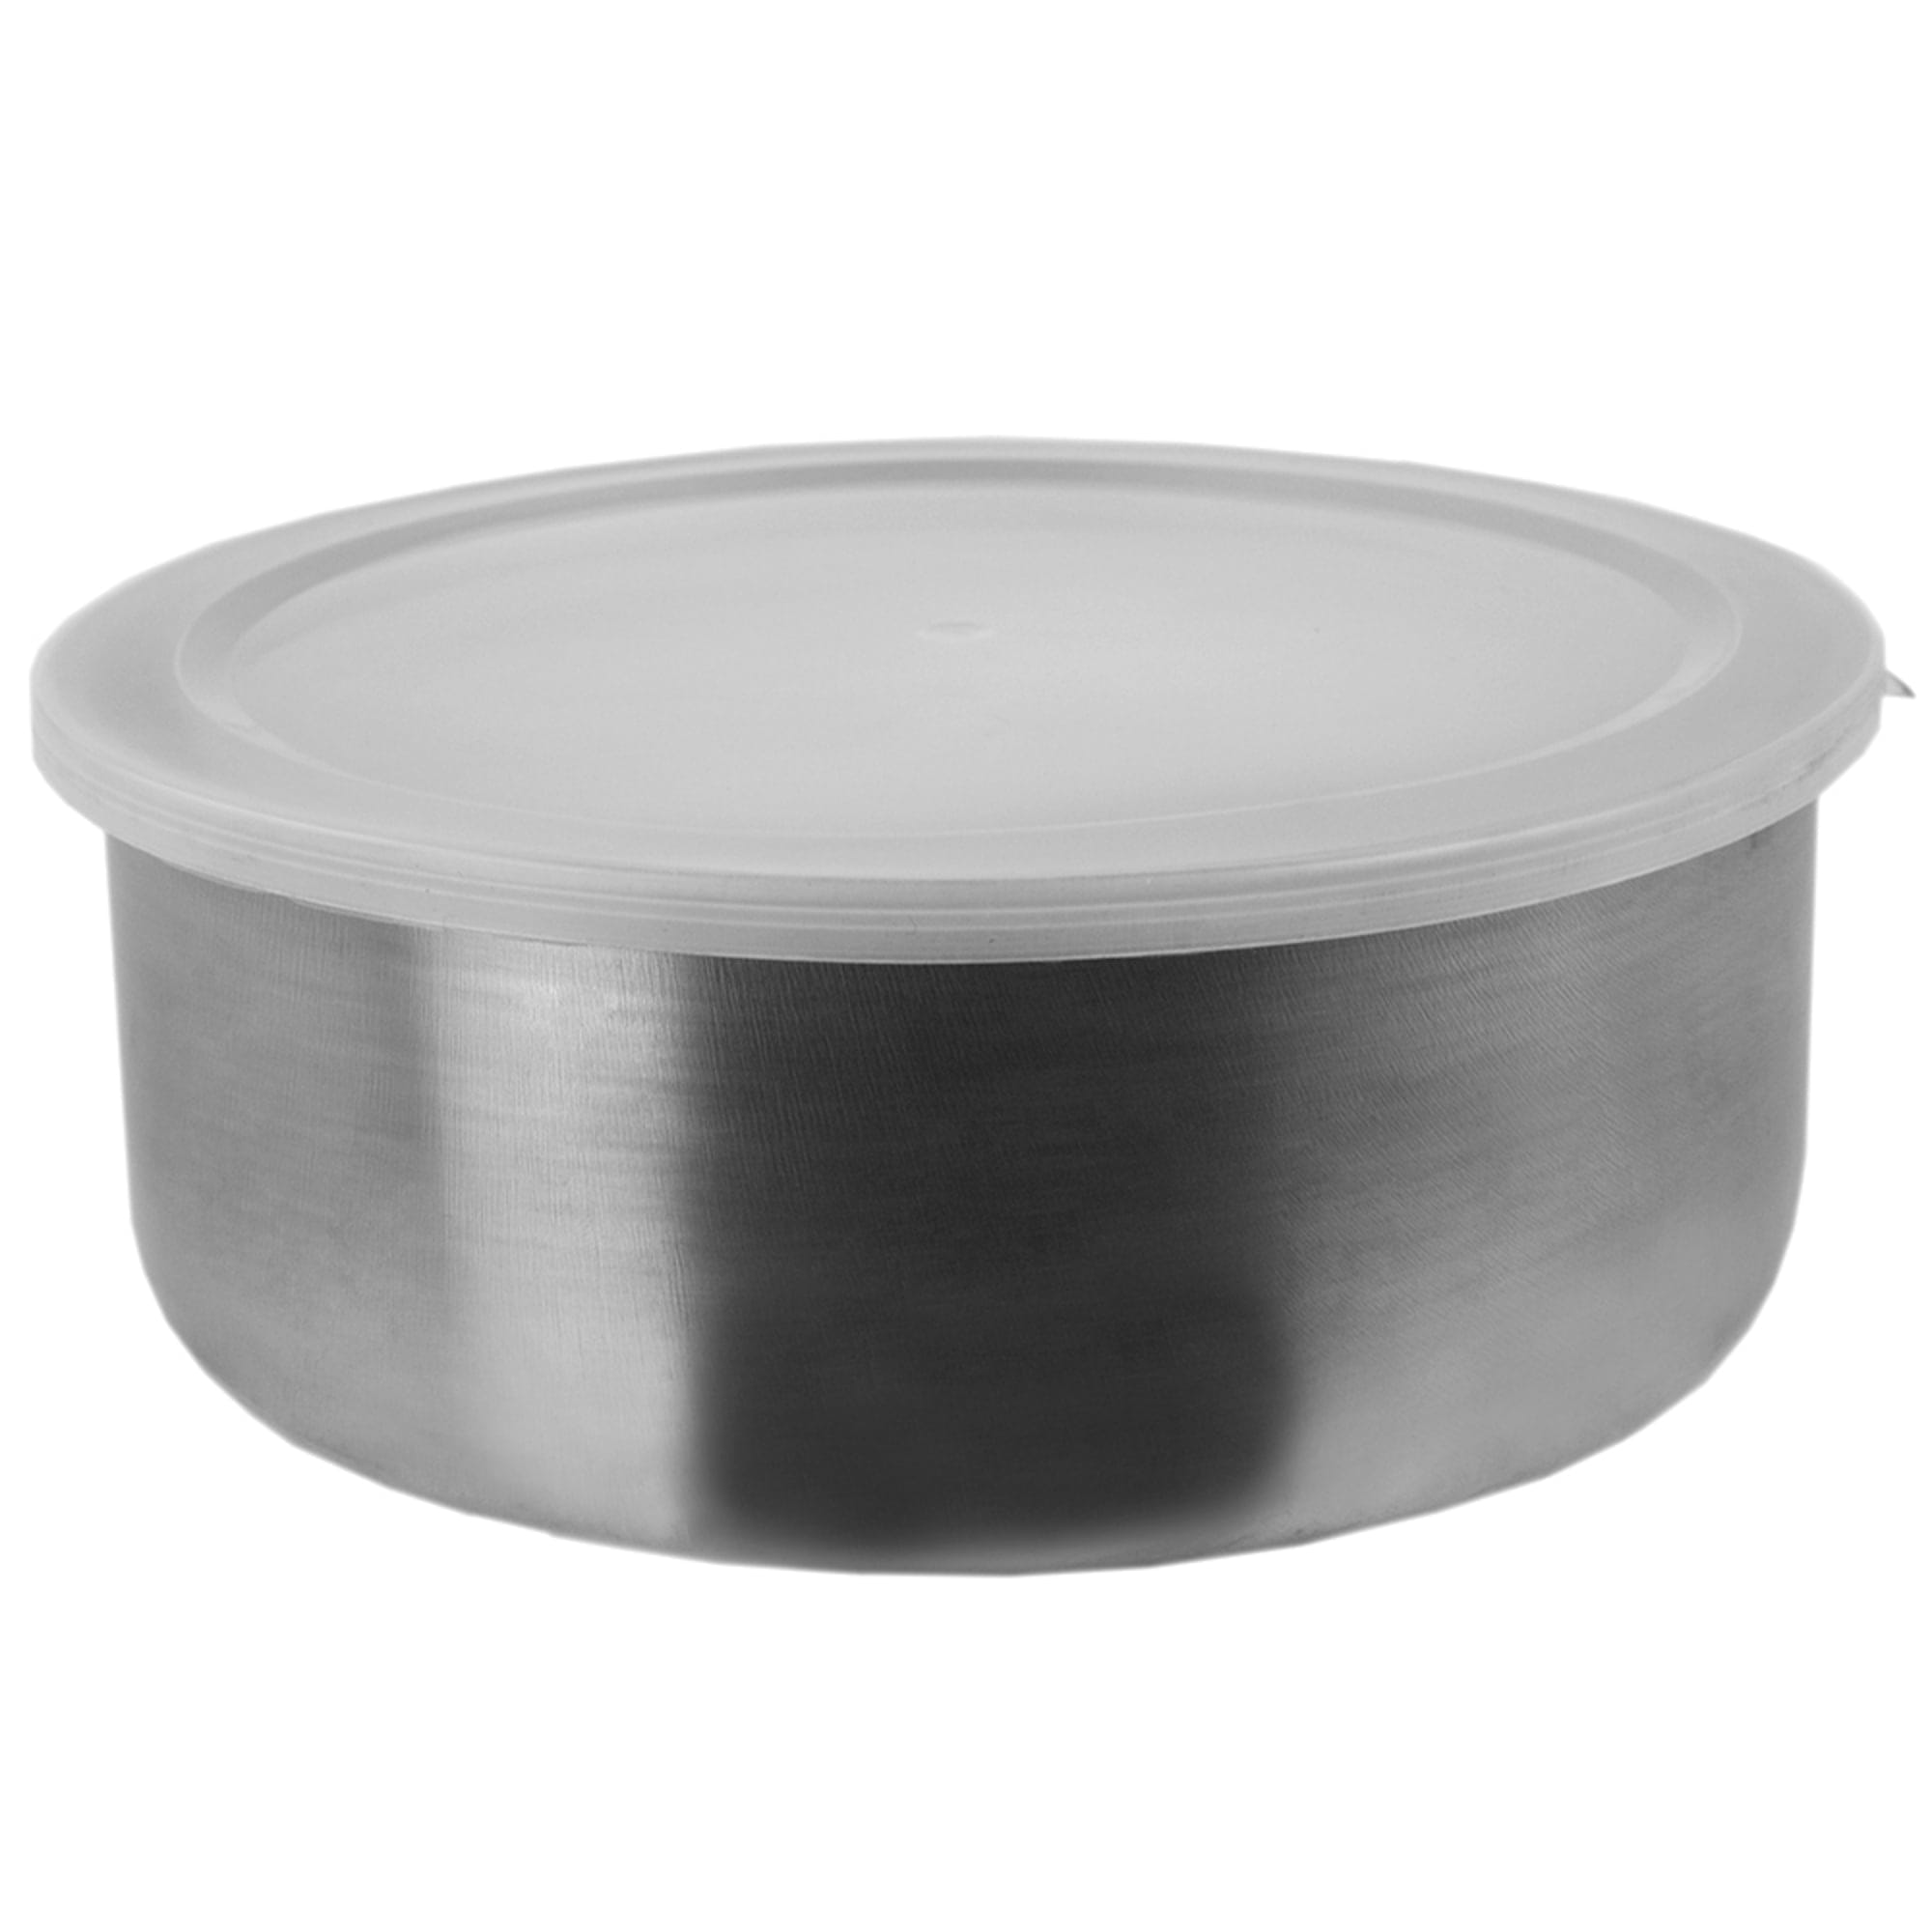 Home Basics Brushed Stainless Steel Food Storage Container Set, (Set of 5), Silver $5.00 EACH, CASE PACK OF 12